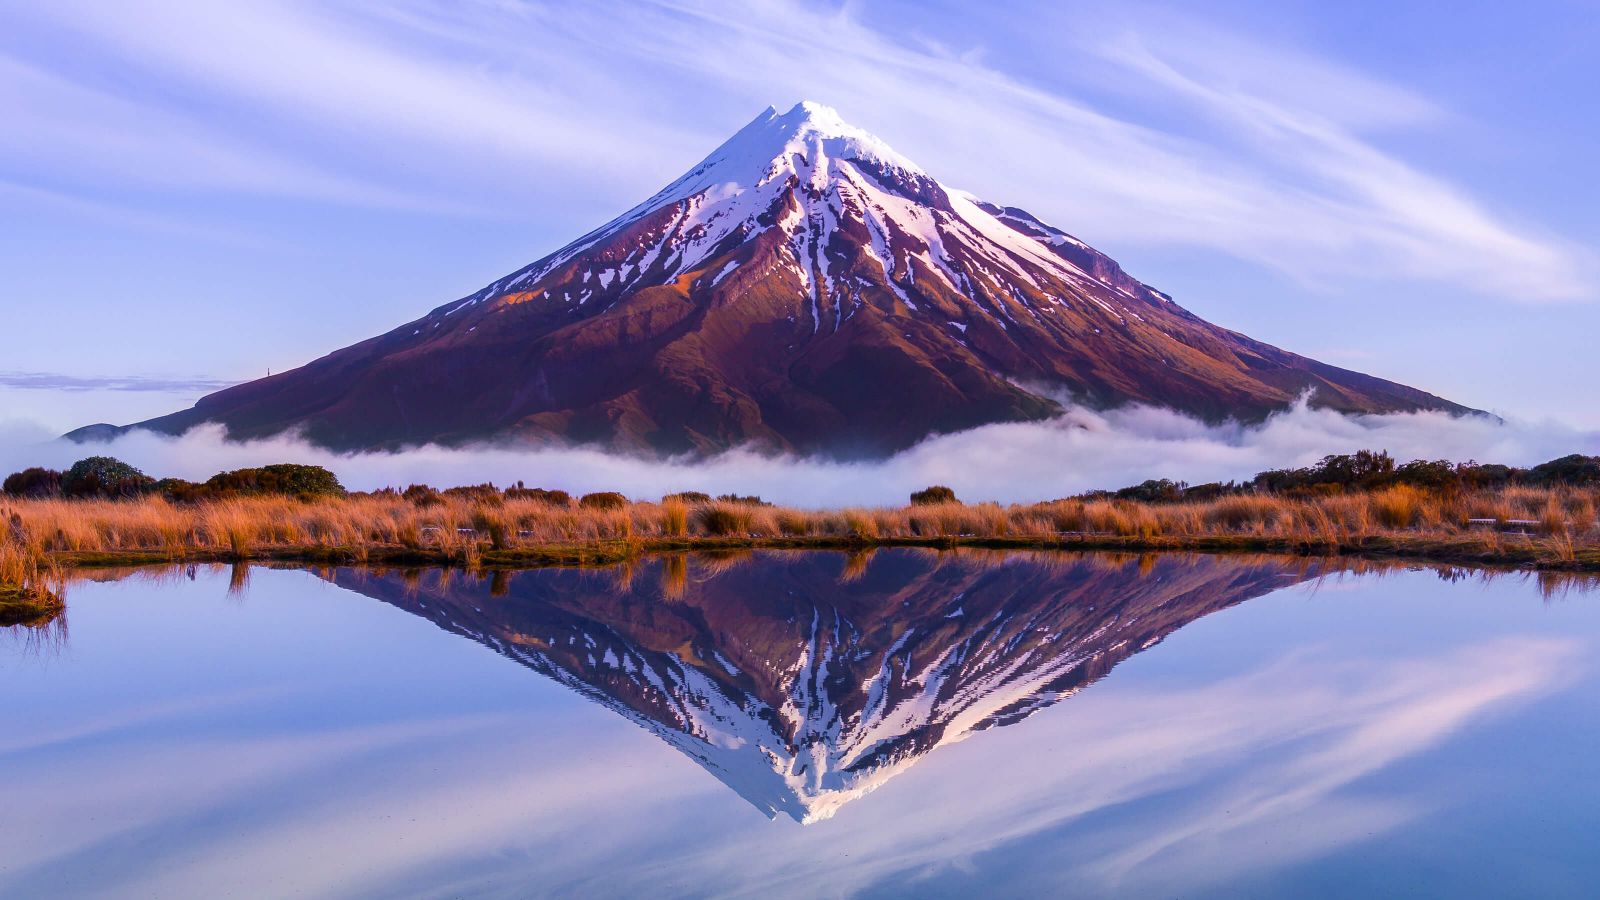 The symmetrical Mount Taranaki with its single, snowy peak extending into a soft violet sky wisped with white clouds. The entire monumental scene is perfectly reflected in the mirror of the lake separated from the mountain’s base by hot orange bush and a strip of low-lying cloud.